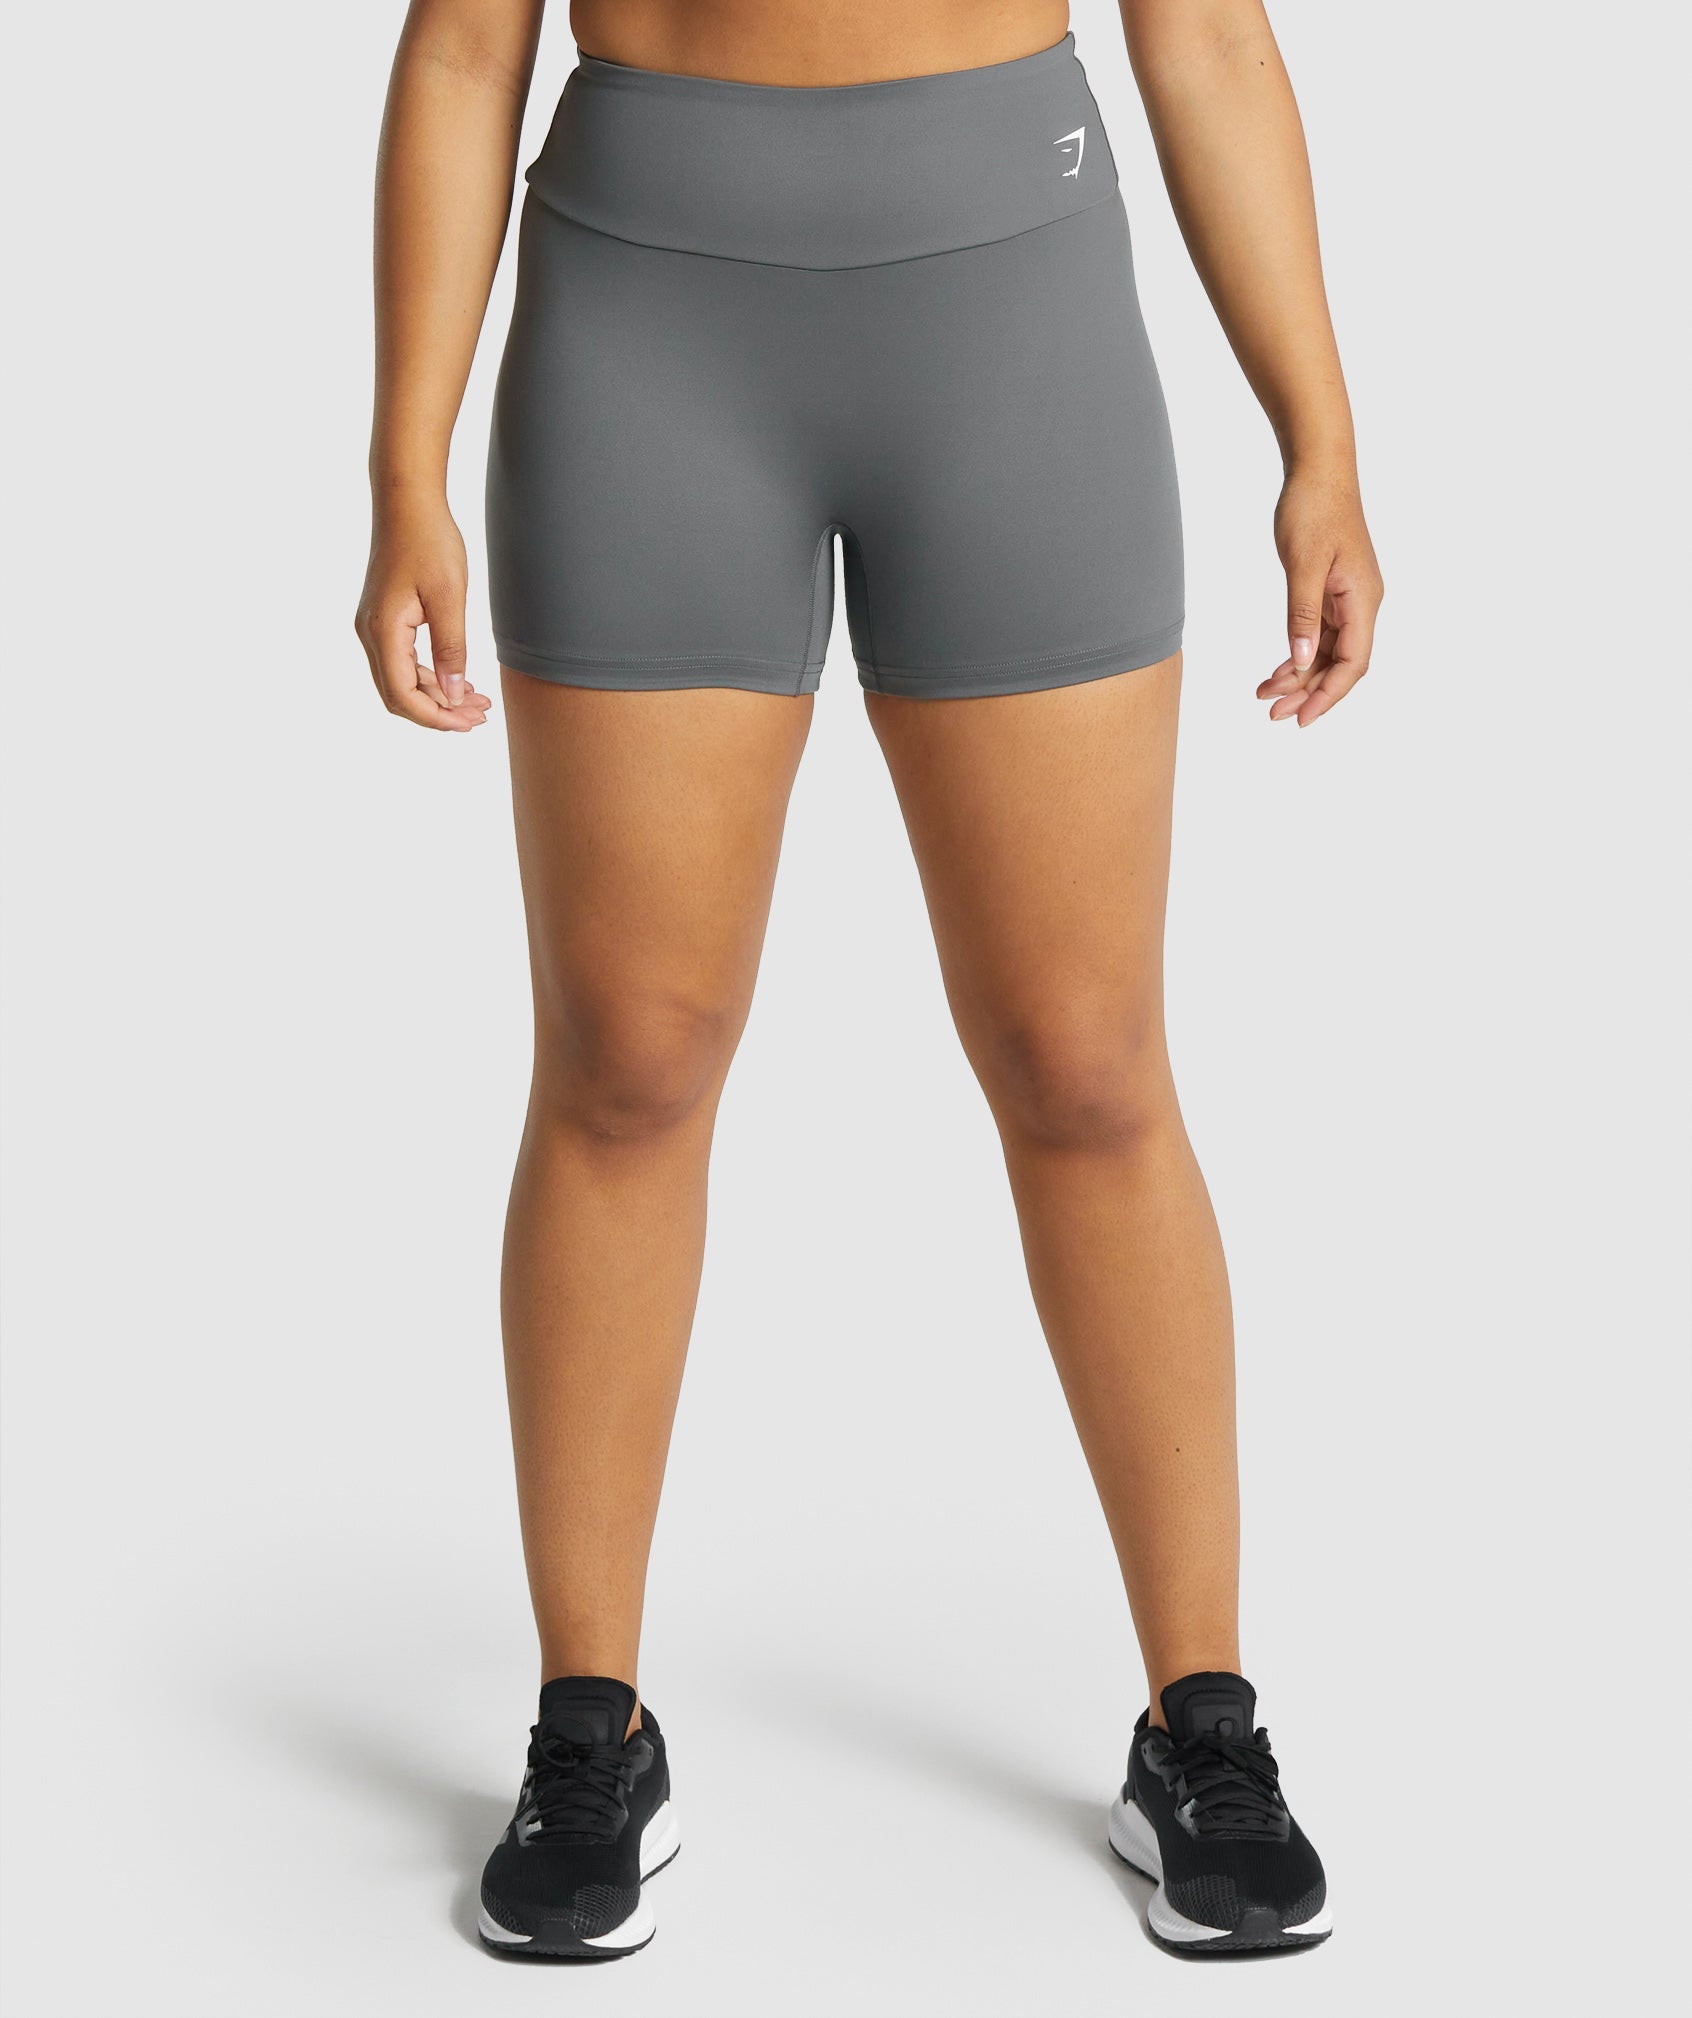 Gymshark Fit Seamless Shorts - Charcoal – Client 446 100K products